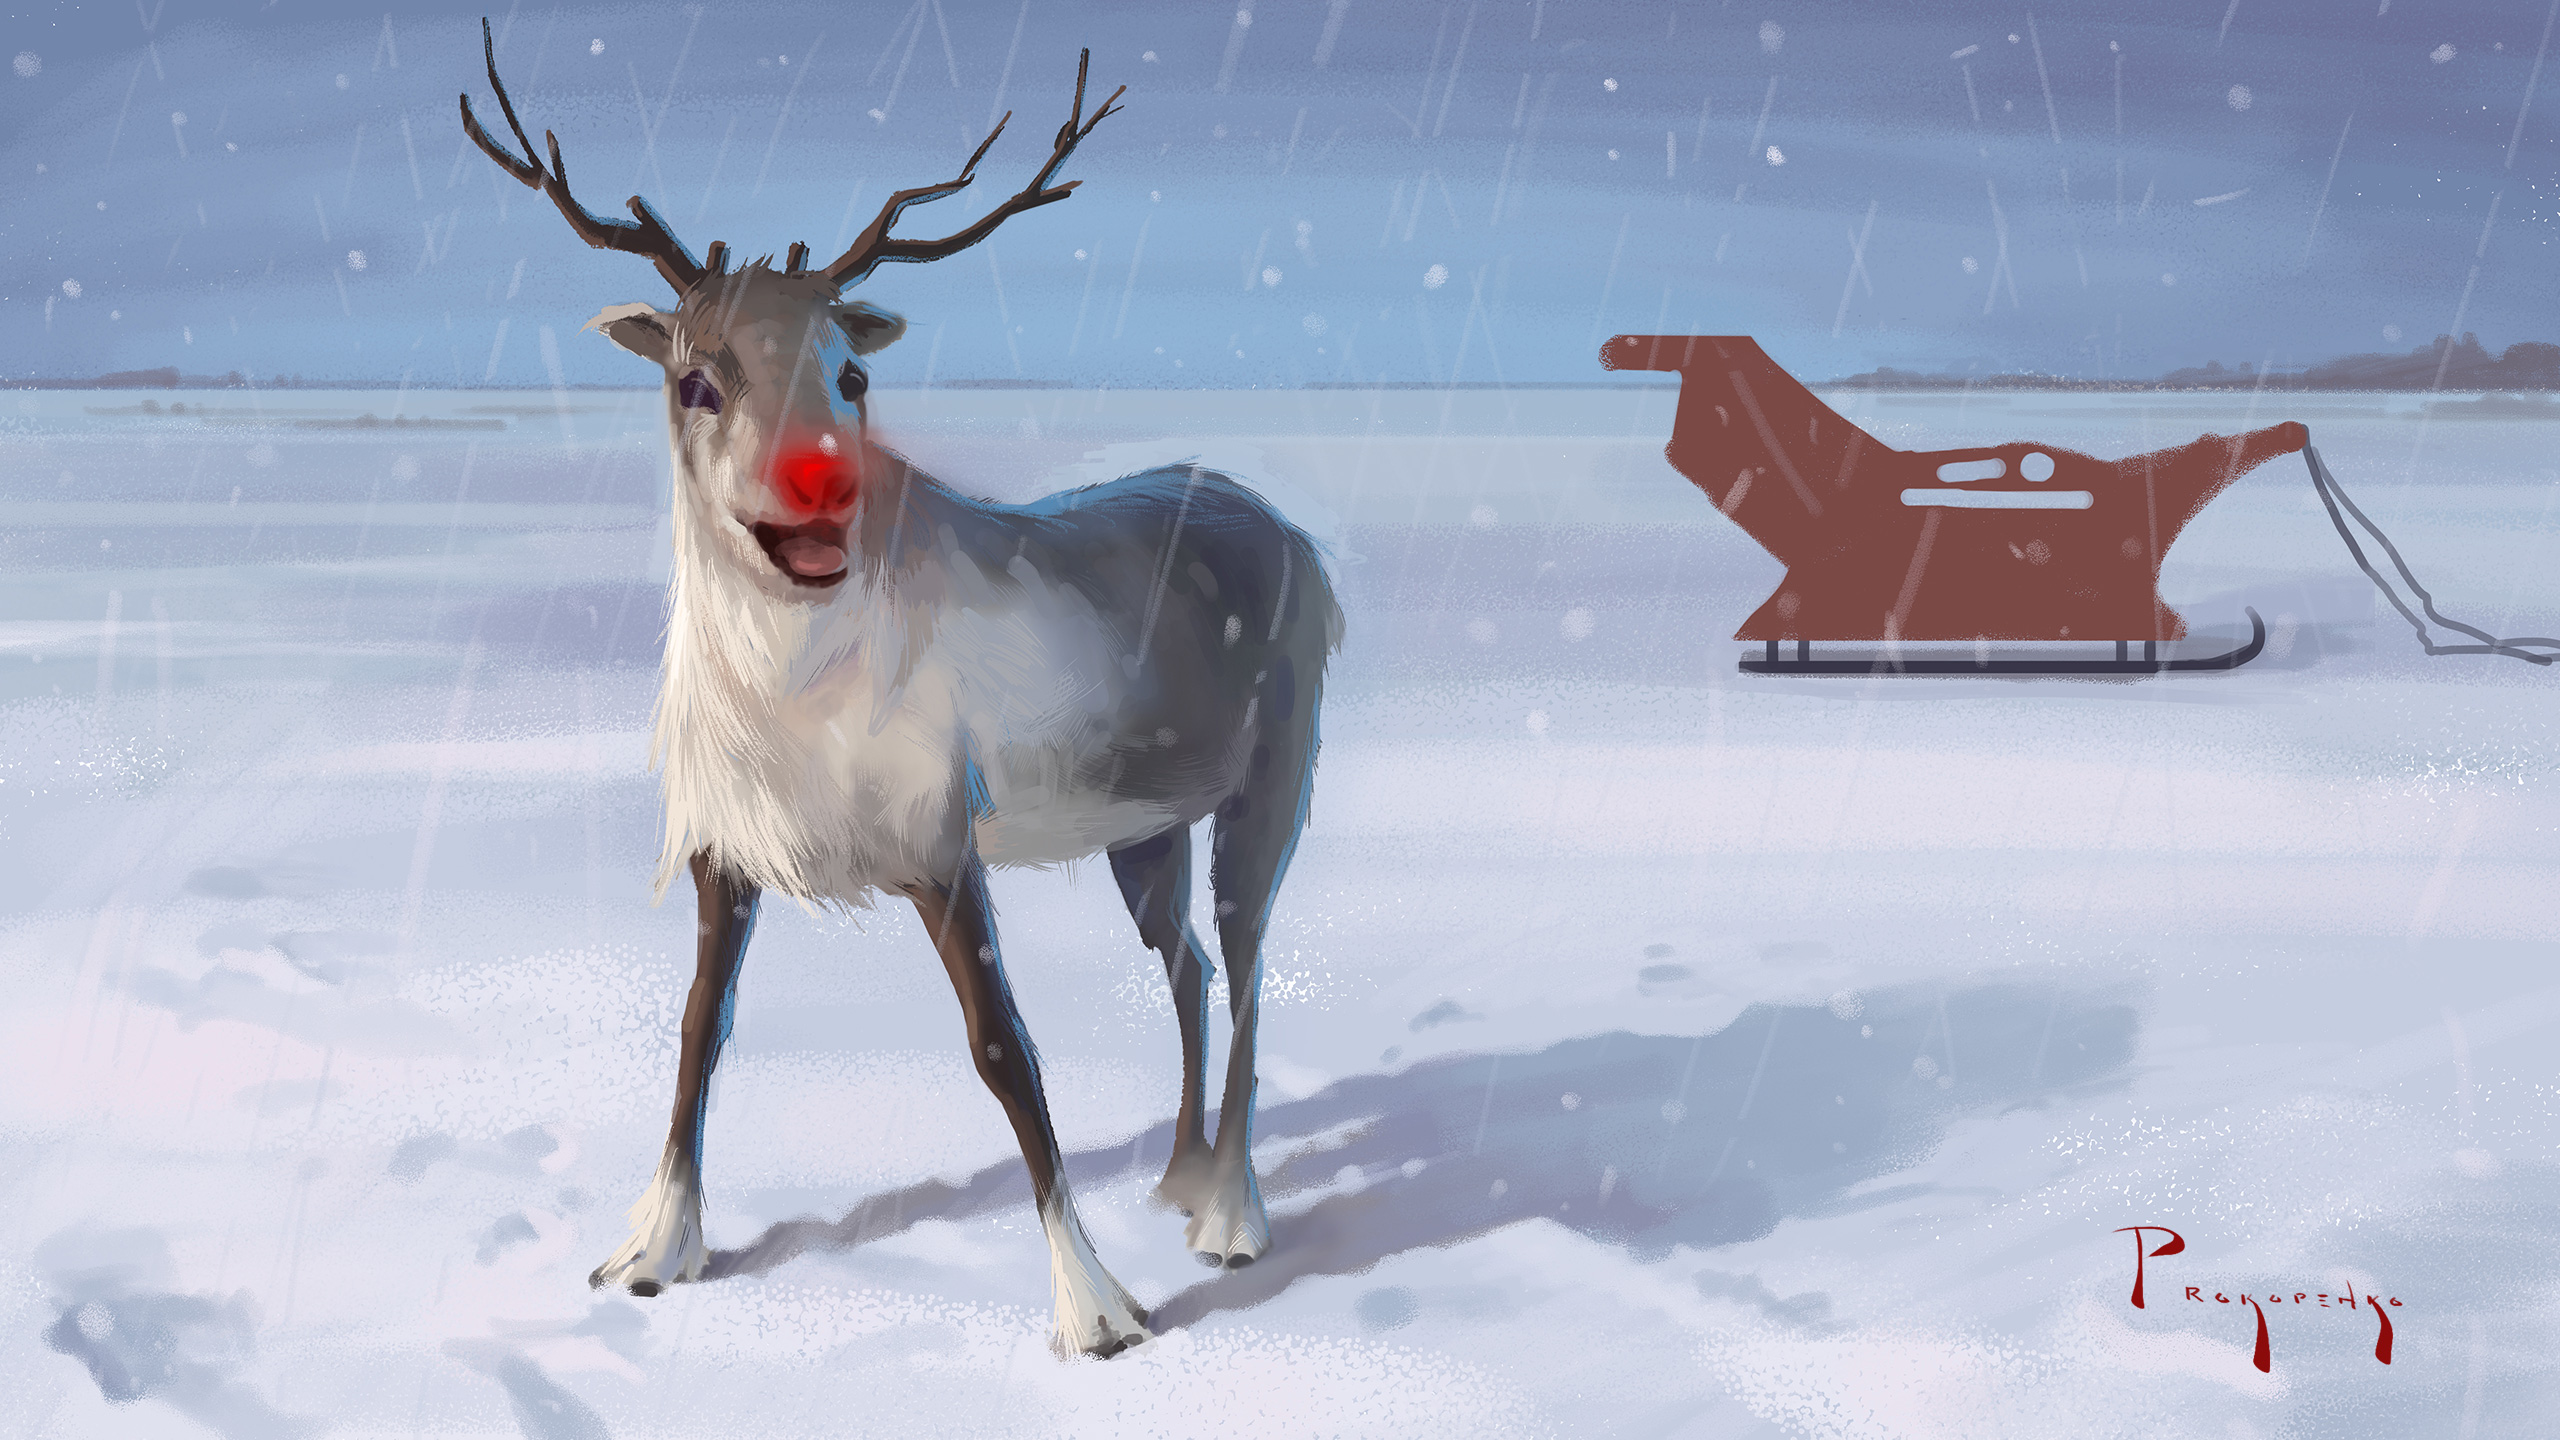 How To Digital Paint Rudolph The Red Nosed Reindeer - Rudolph The Red Nosed Reindeer Realistic , HD Wallpaper & Backgrounds